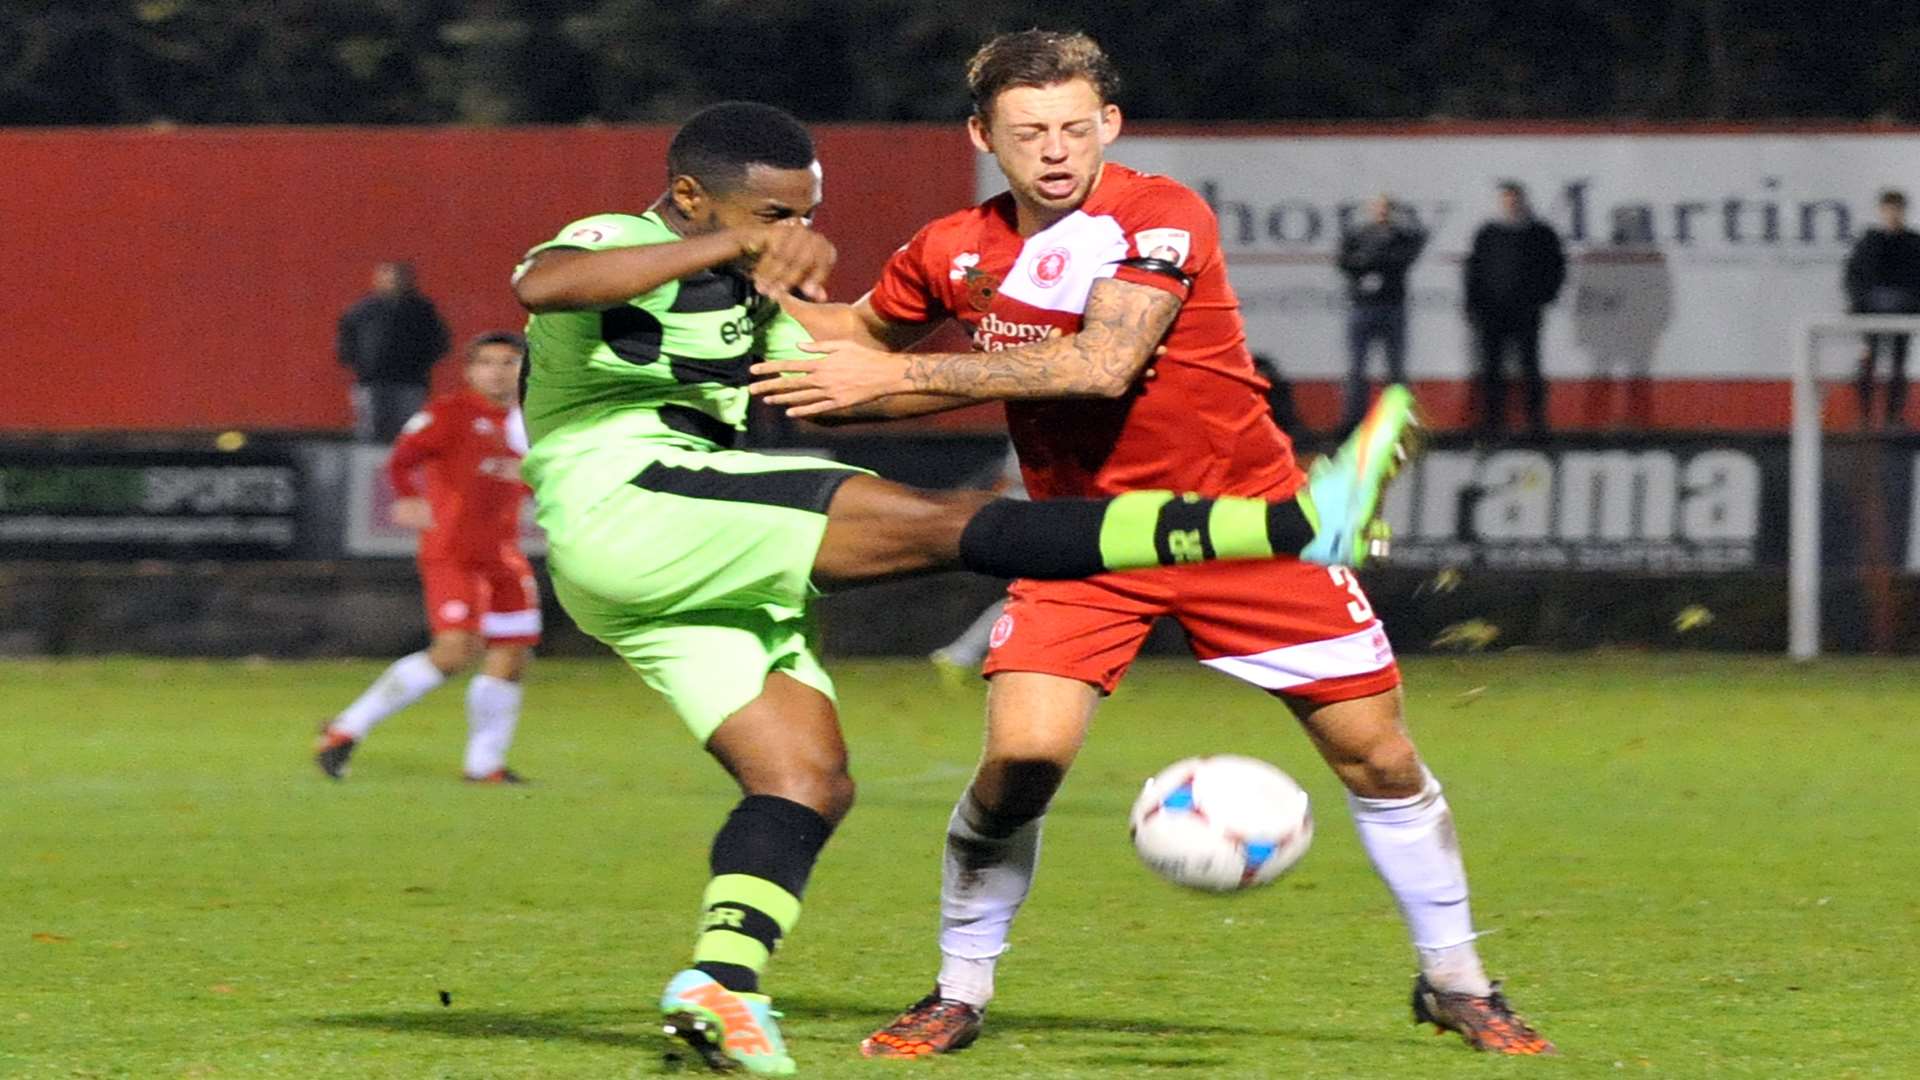 Ben Jefford in action against Forest Green earlier this season. Picture: David Brown